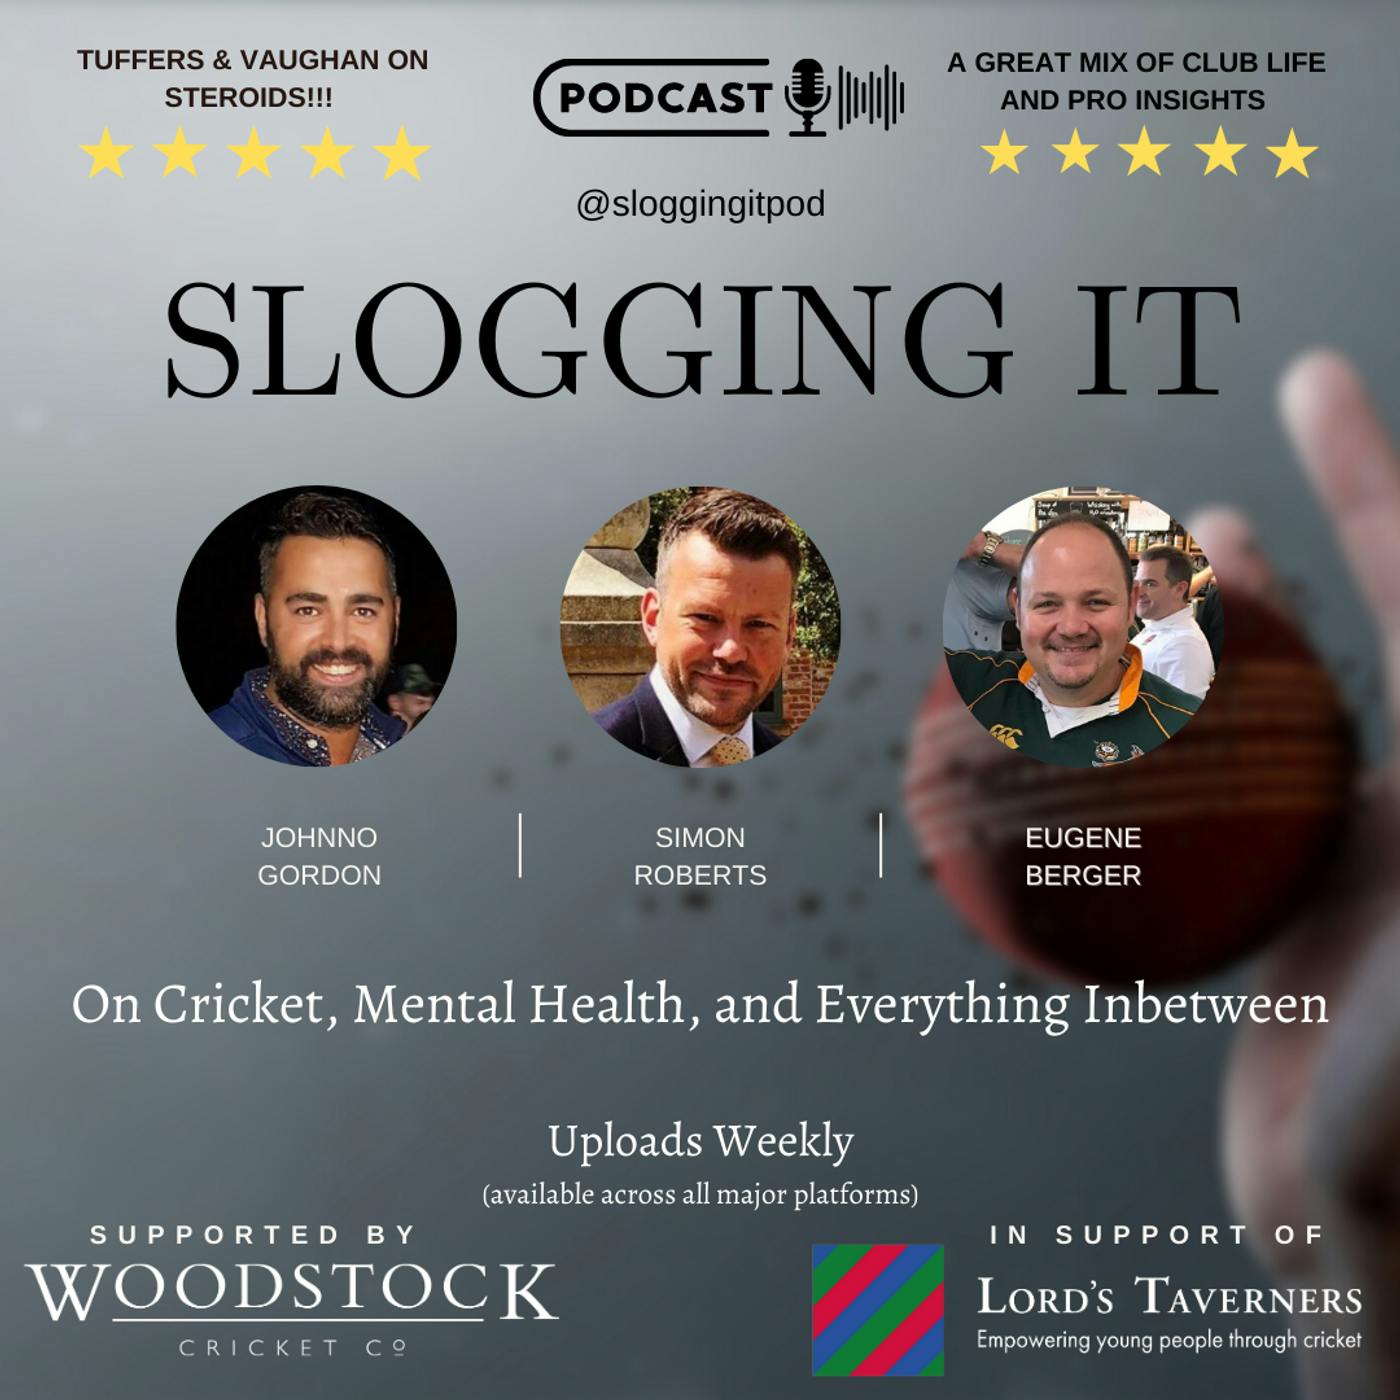 Slogging It - An Introduction